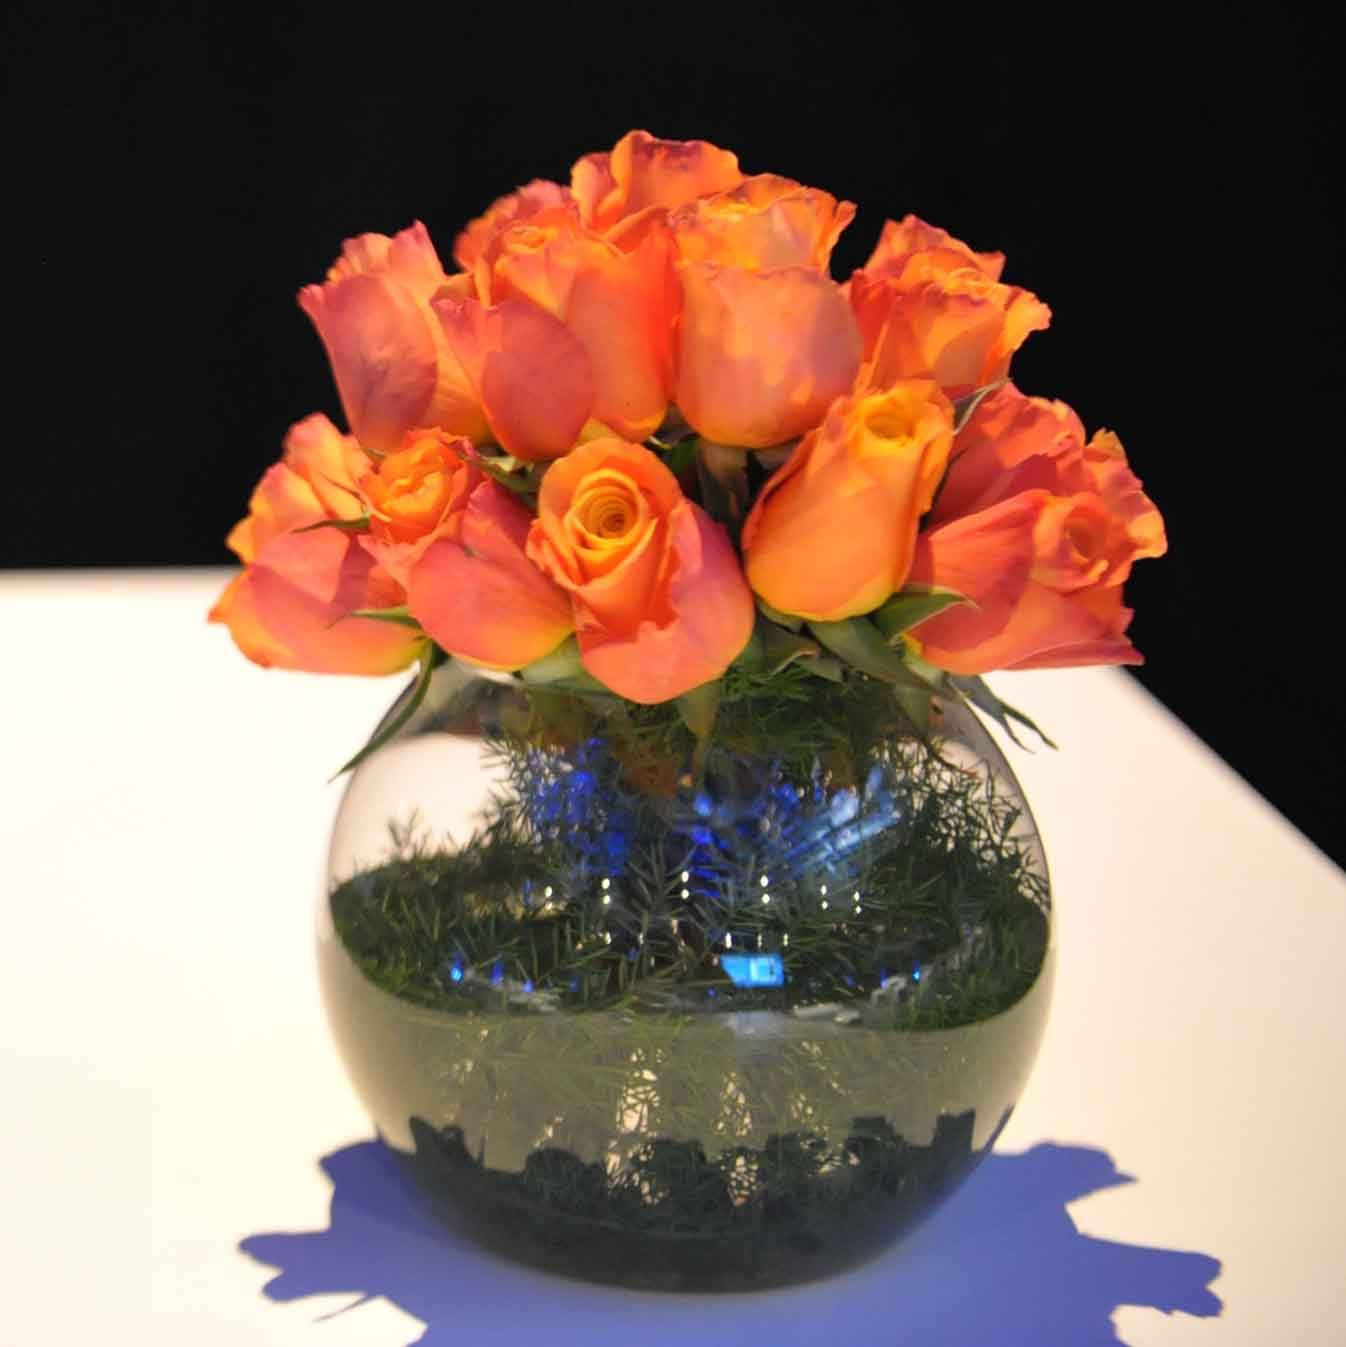 15 Recommended orange Flowers In Vase 2024 free download orange flowers in vase of orange flower vase photos 8 od orange rose foliage lined gold fish in orange flower vase photos 8 od orange rose foliage lined gold fish bowl of orange flower